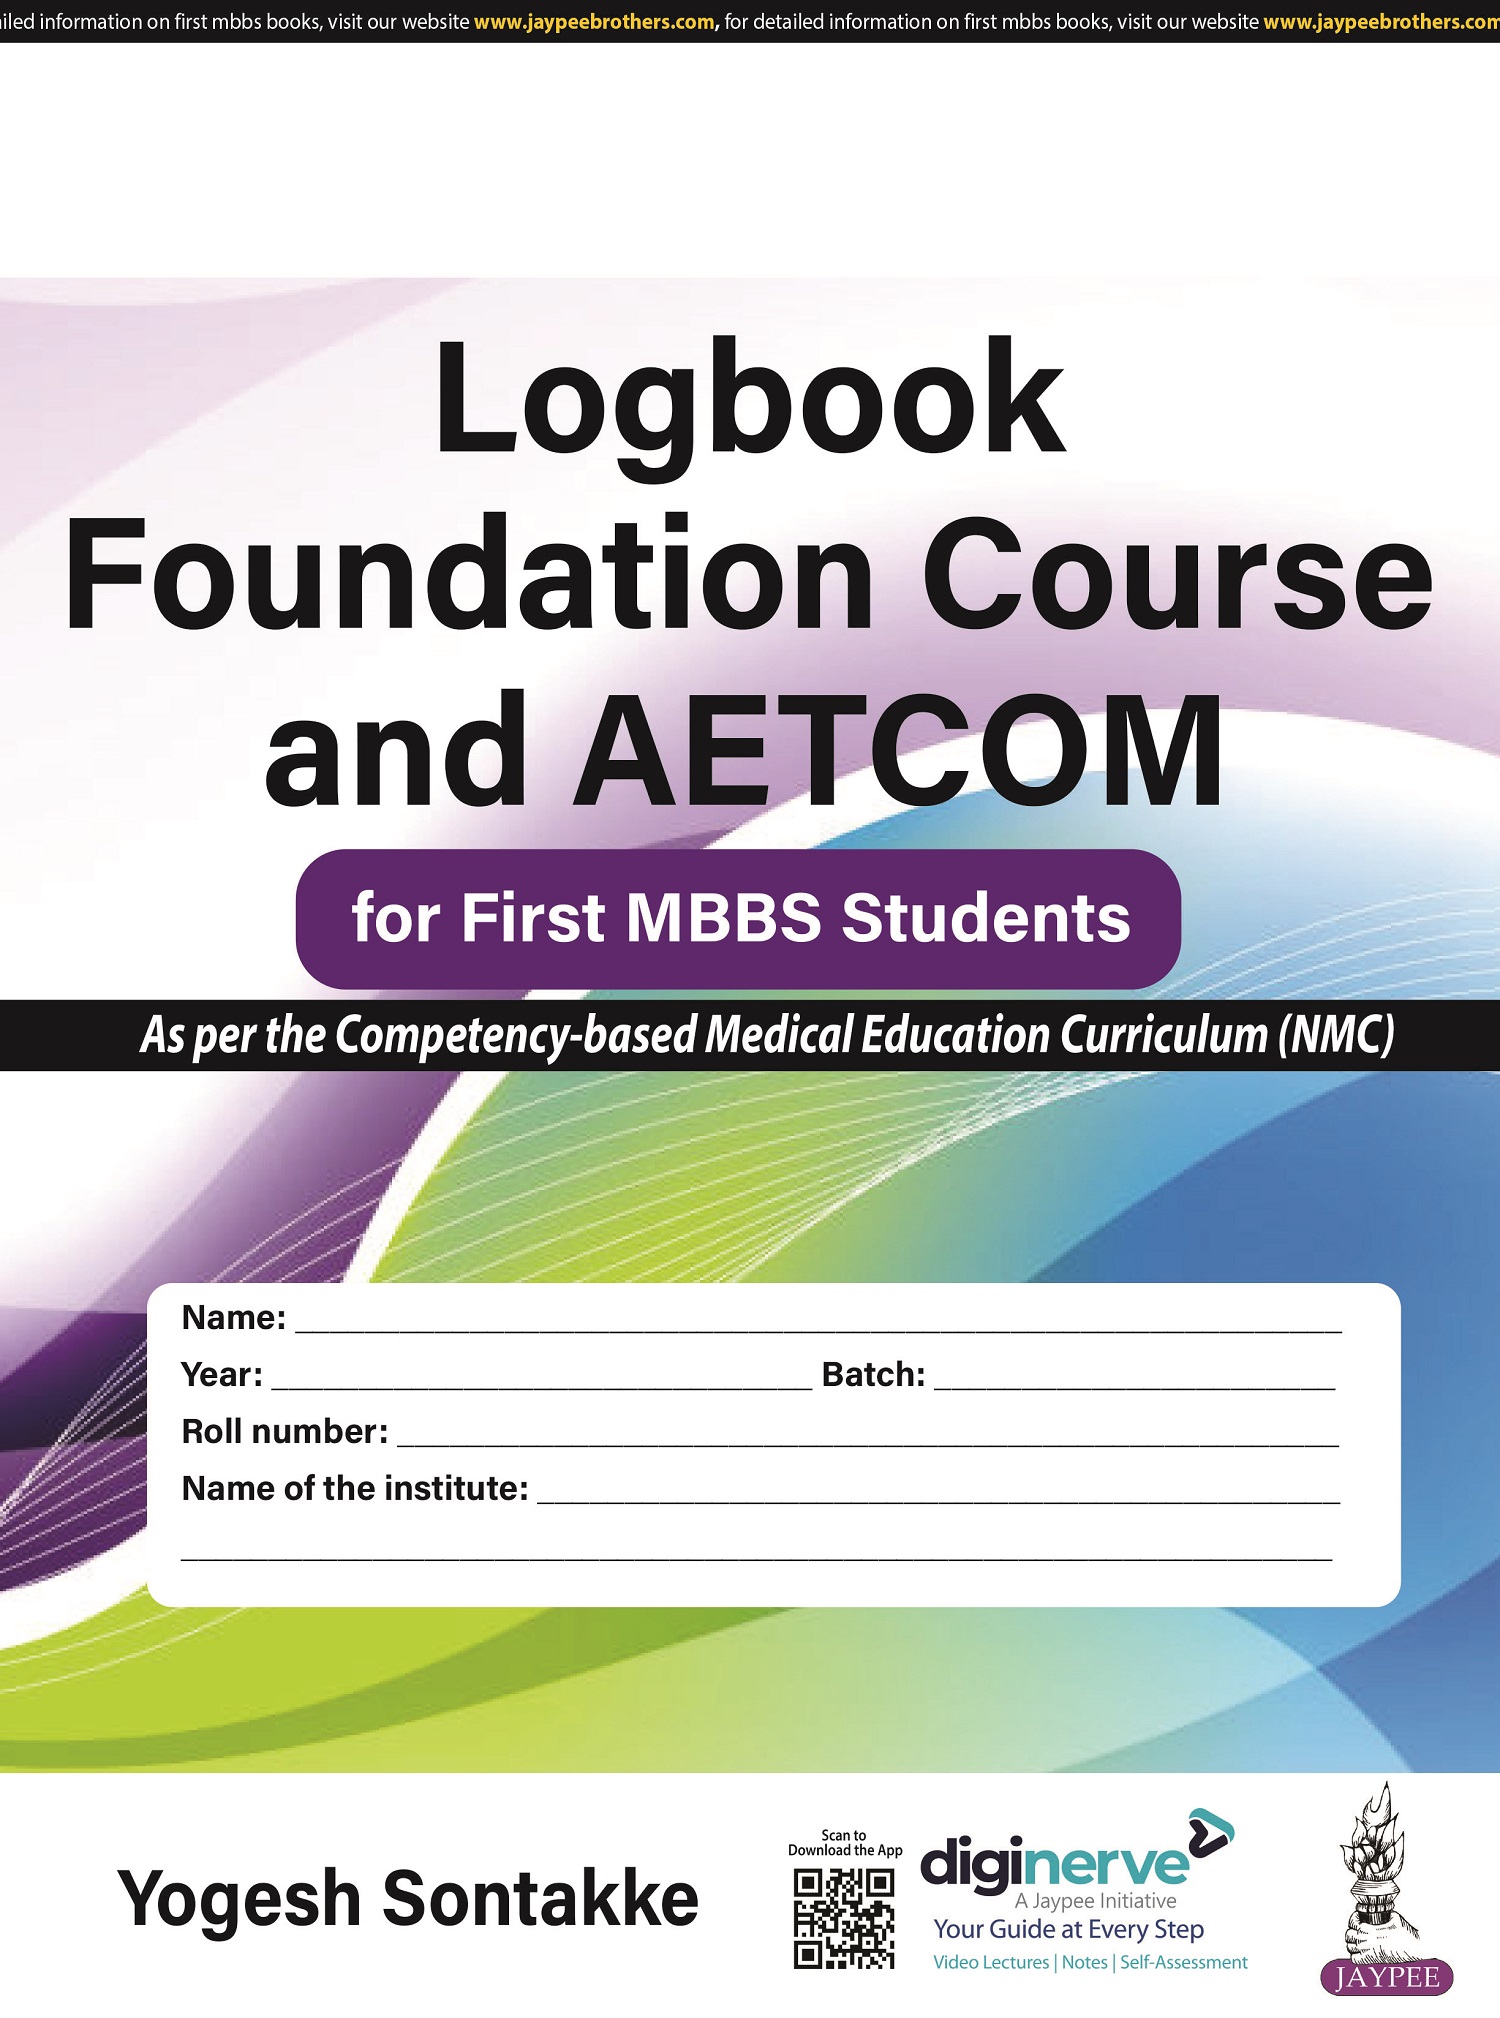 Logbook Foundation Course and AETCOM for First MBBS Students